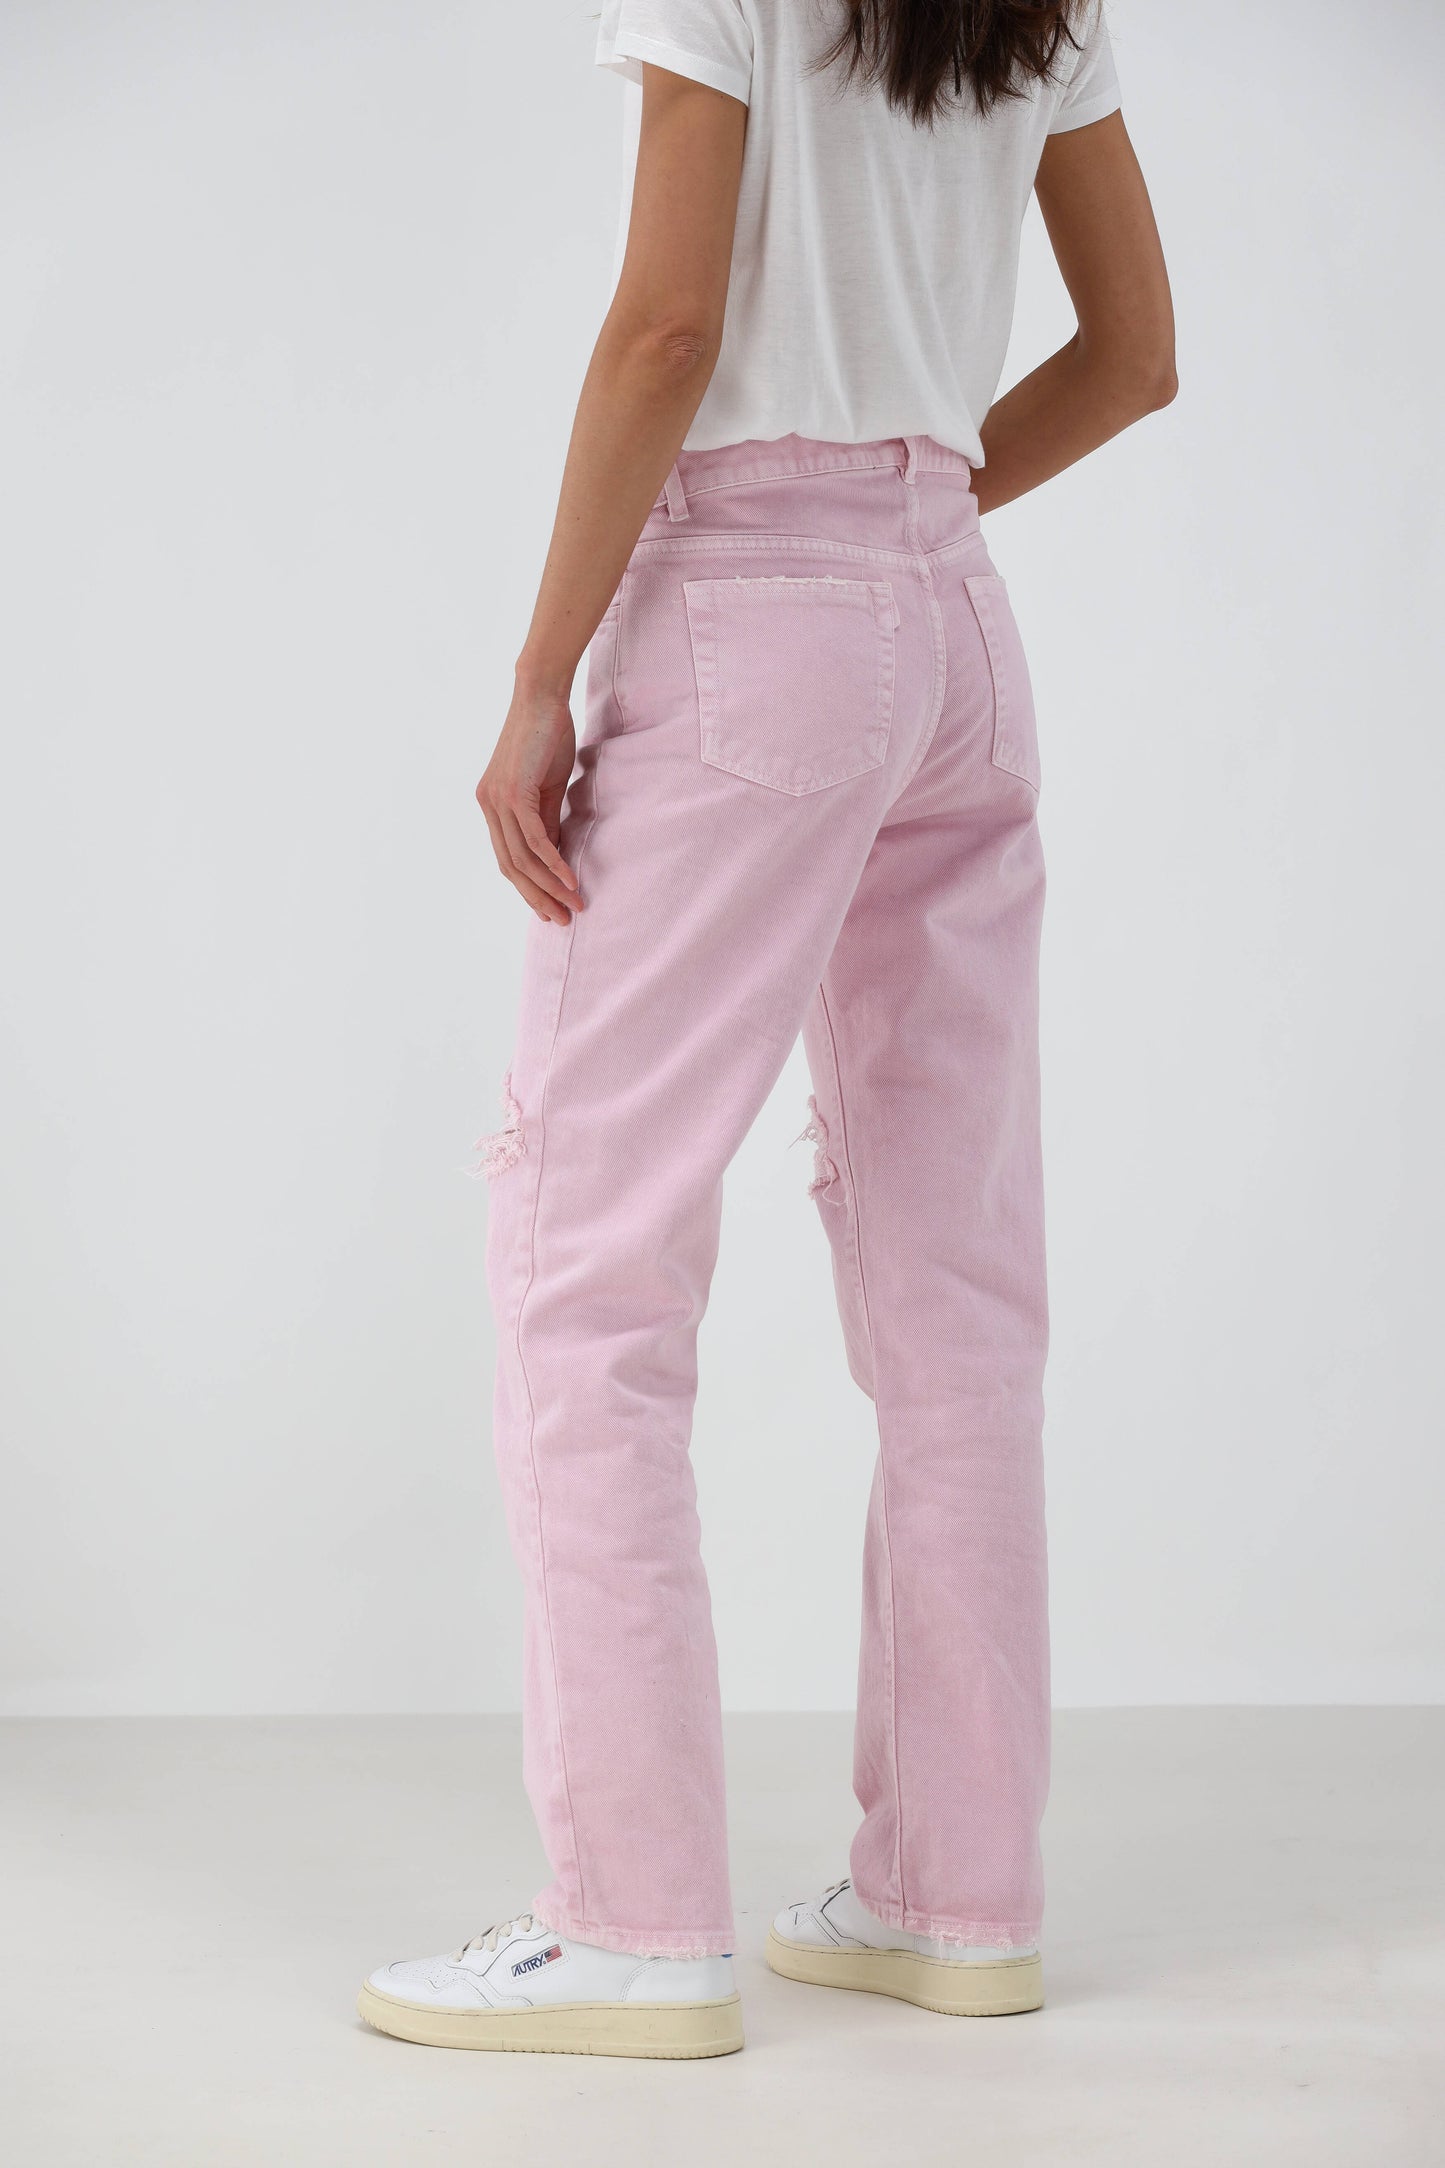 Jeans Sabina Destroyed in Mineral Rose3x1 - Anita Hass